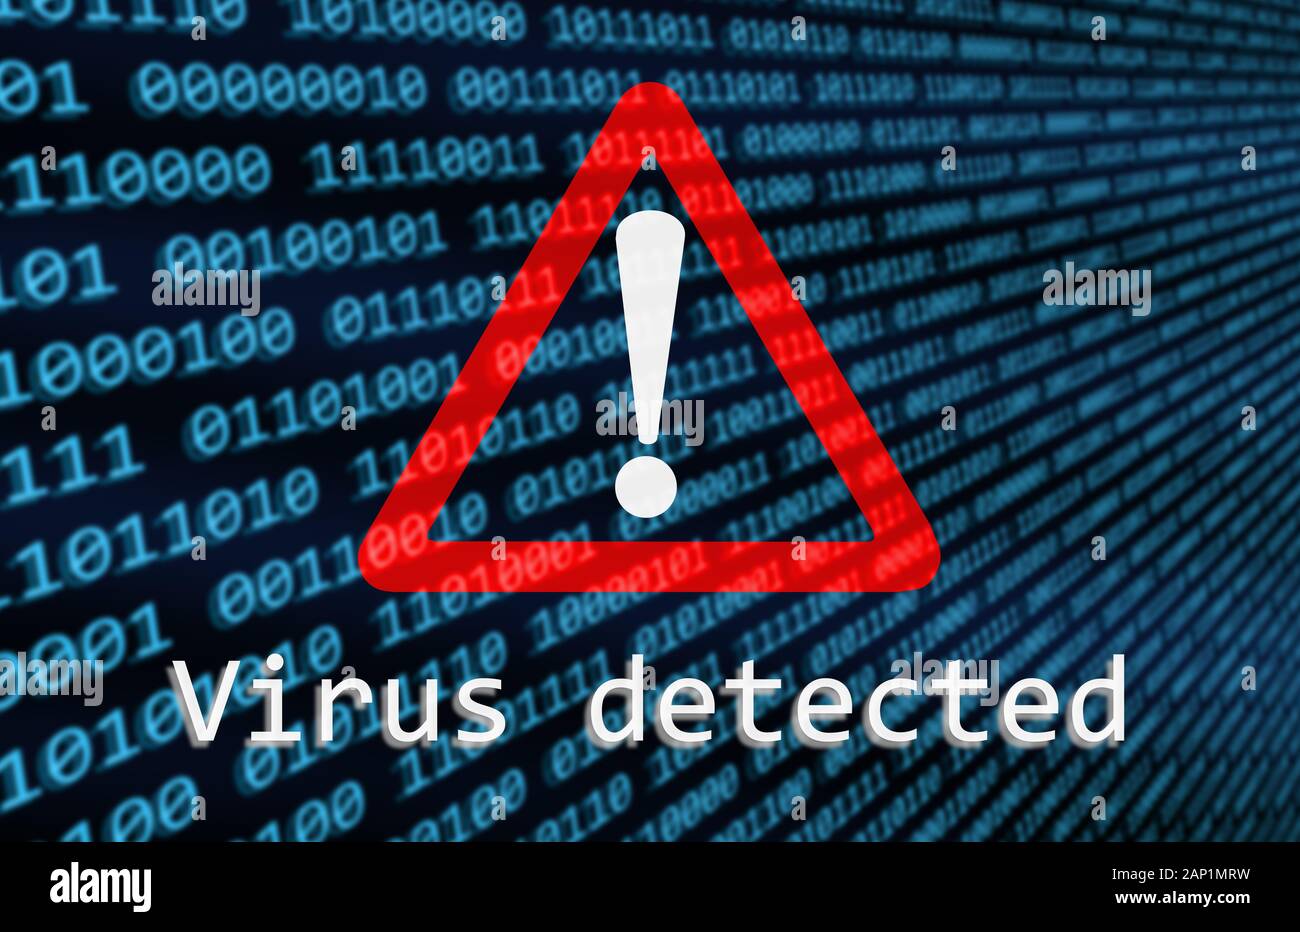 Virus detected warning alert sign over binary computer code, to illustrate a computer infected with a virus. Stock Photo